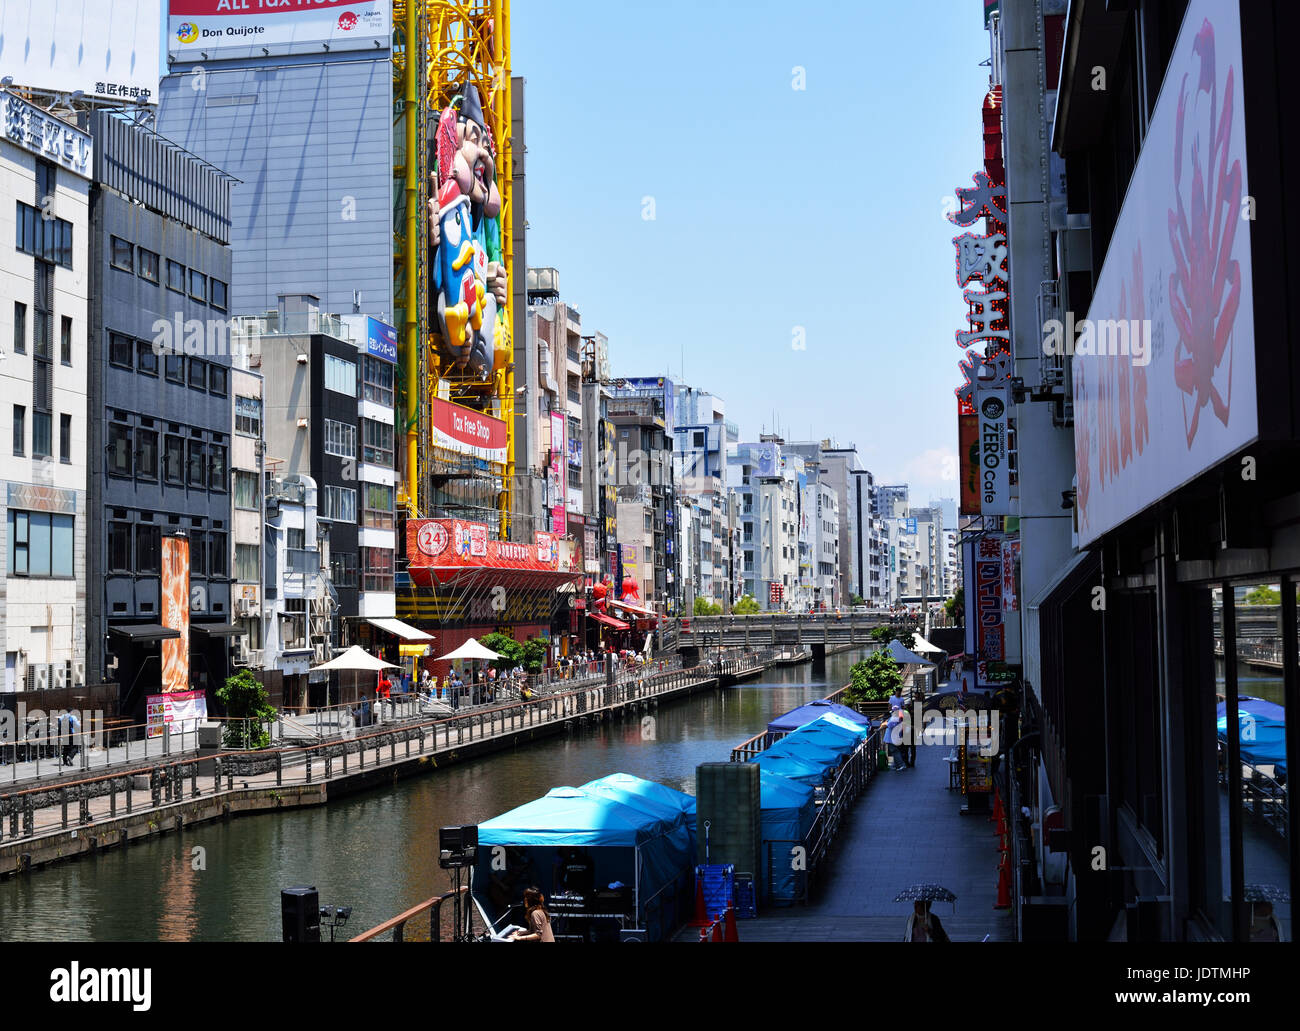 Buildings and billboards along the Dotonbori Canal in the Namba district of Osaka, Japan Stock Photo